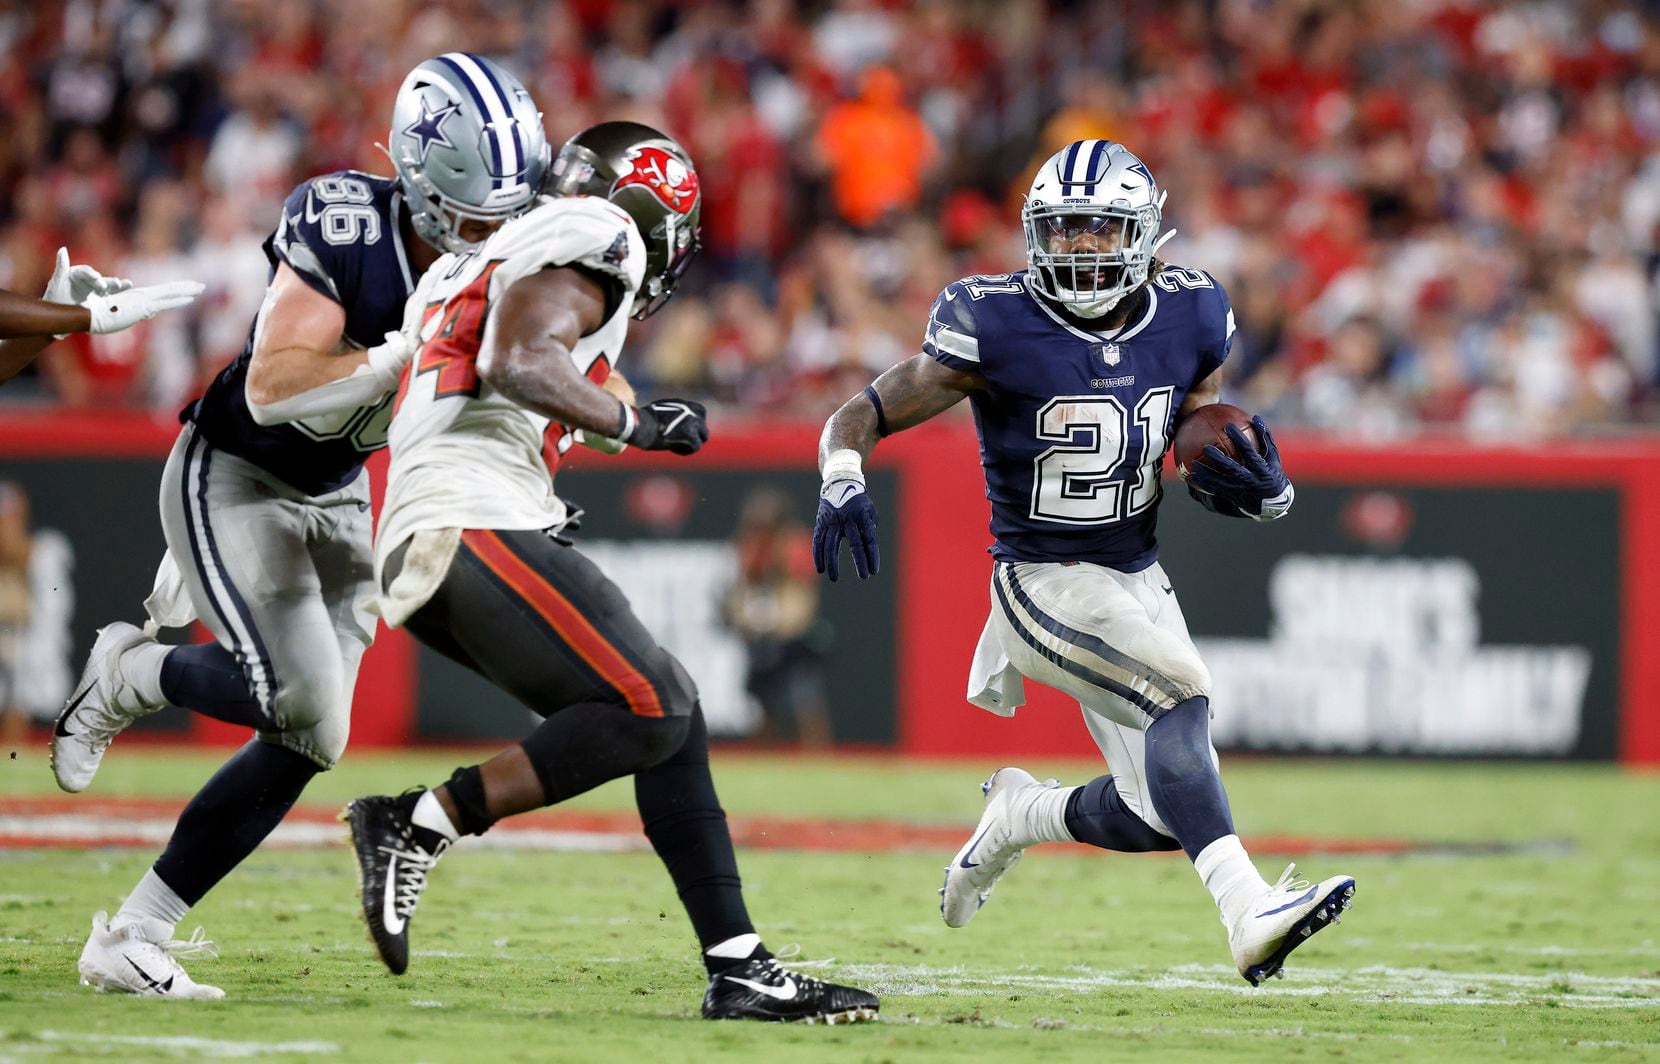 Dallas Cowboys running back Ezekiel Elliott (21) receives a block from tight end Dalton Schultz (86) against the Tampa Bay Buccaneers during the third quarter at Raymond James Stadium in Tampa, Florida, Thursday, September 9, 2021.